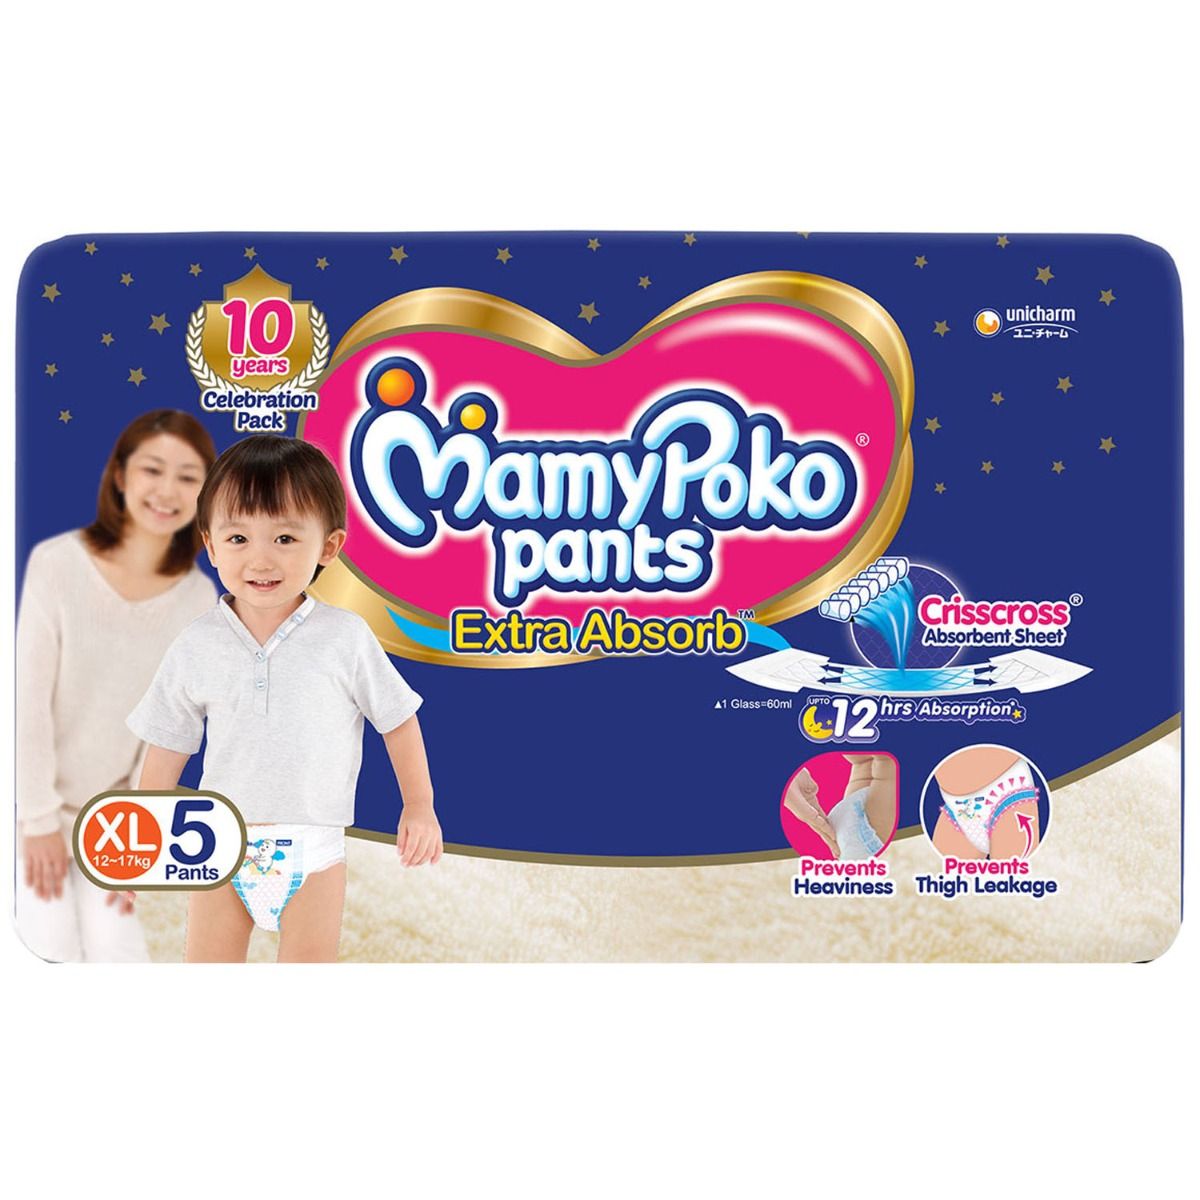 MamyPoko Extra Absorb Diaper Pants XL, 5 Count, Pack of 1 